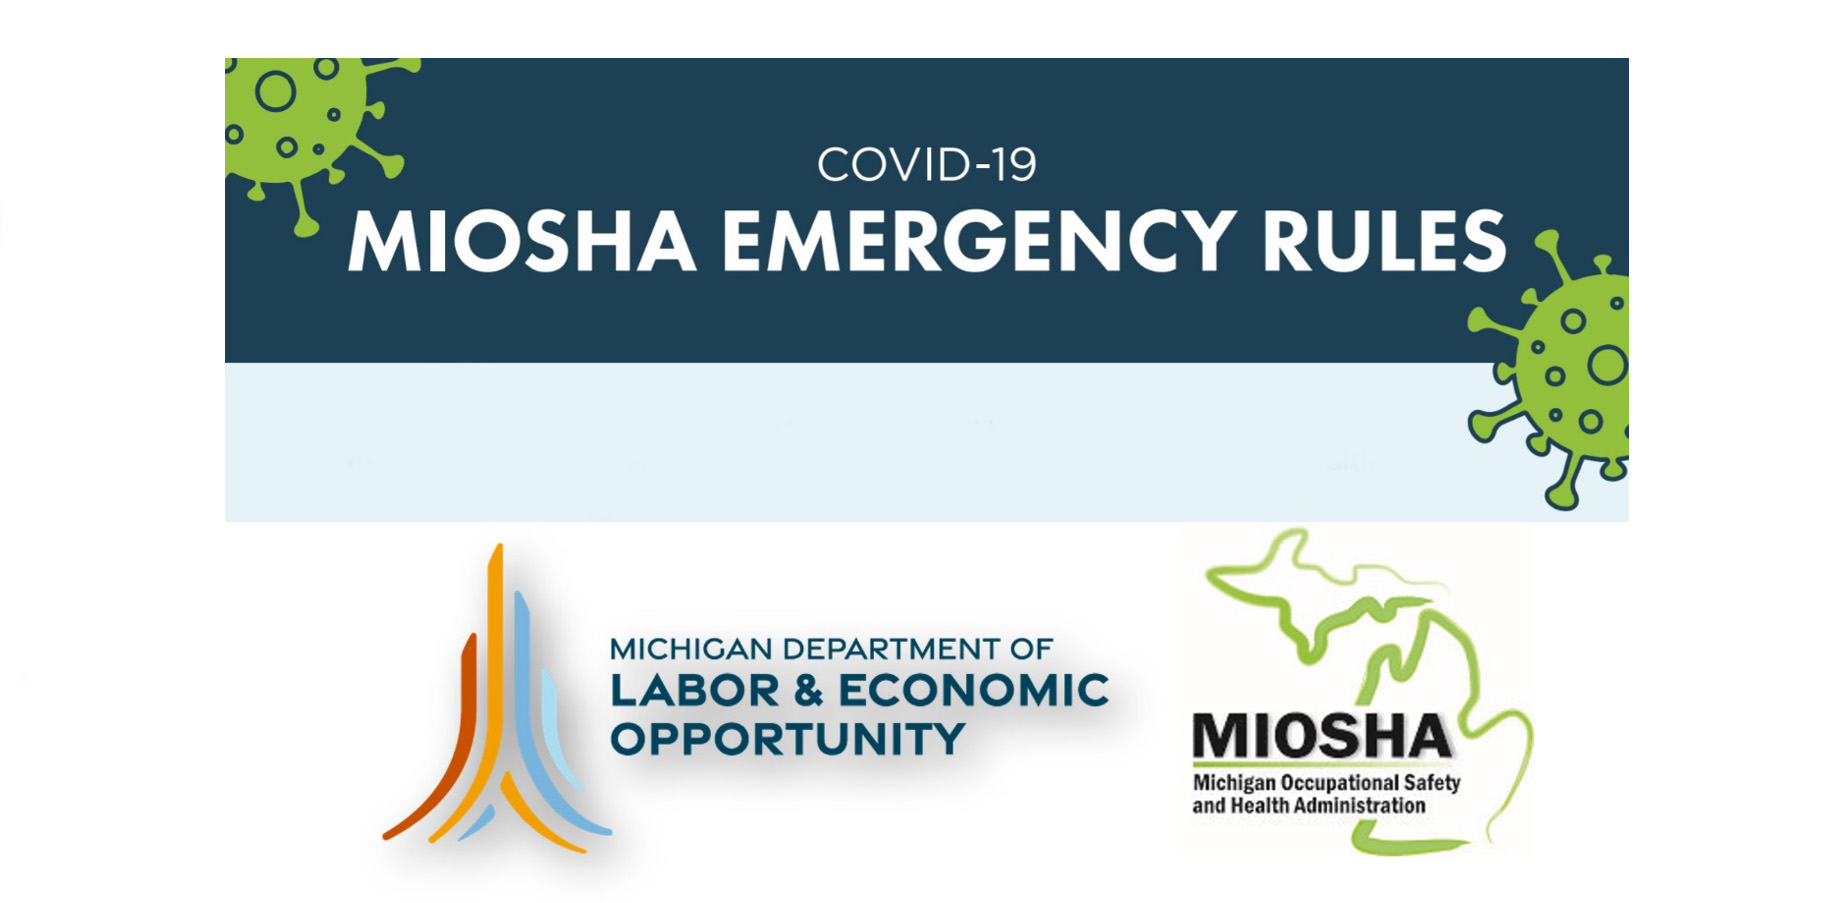 In Light of COVID Surge, MIOSHA Extends Emergency Rules to October 14